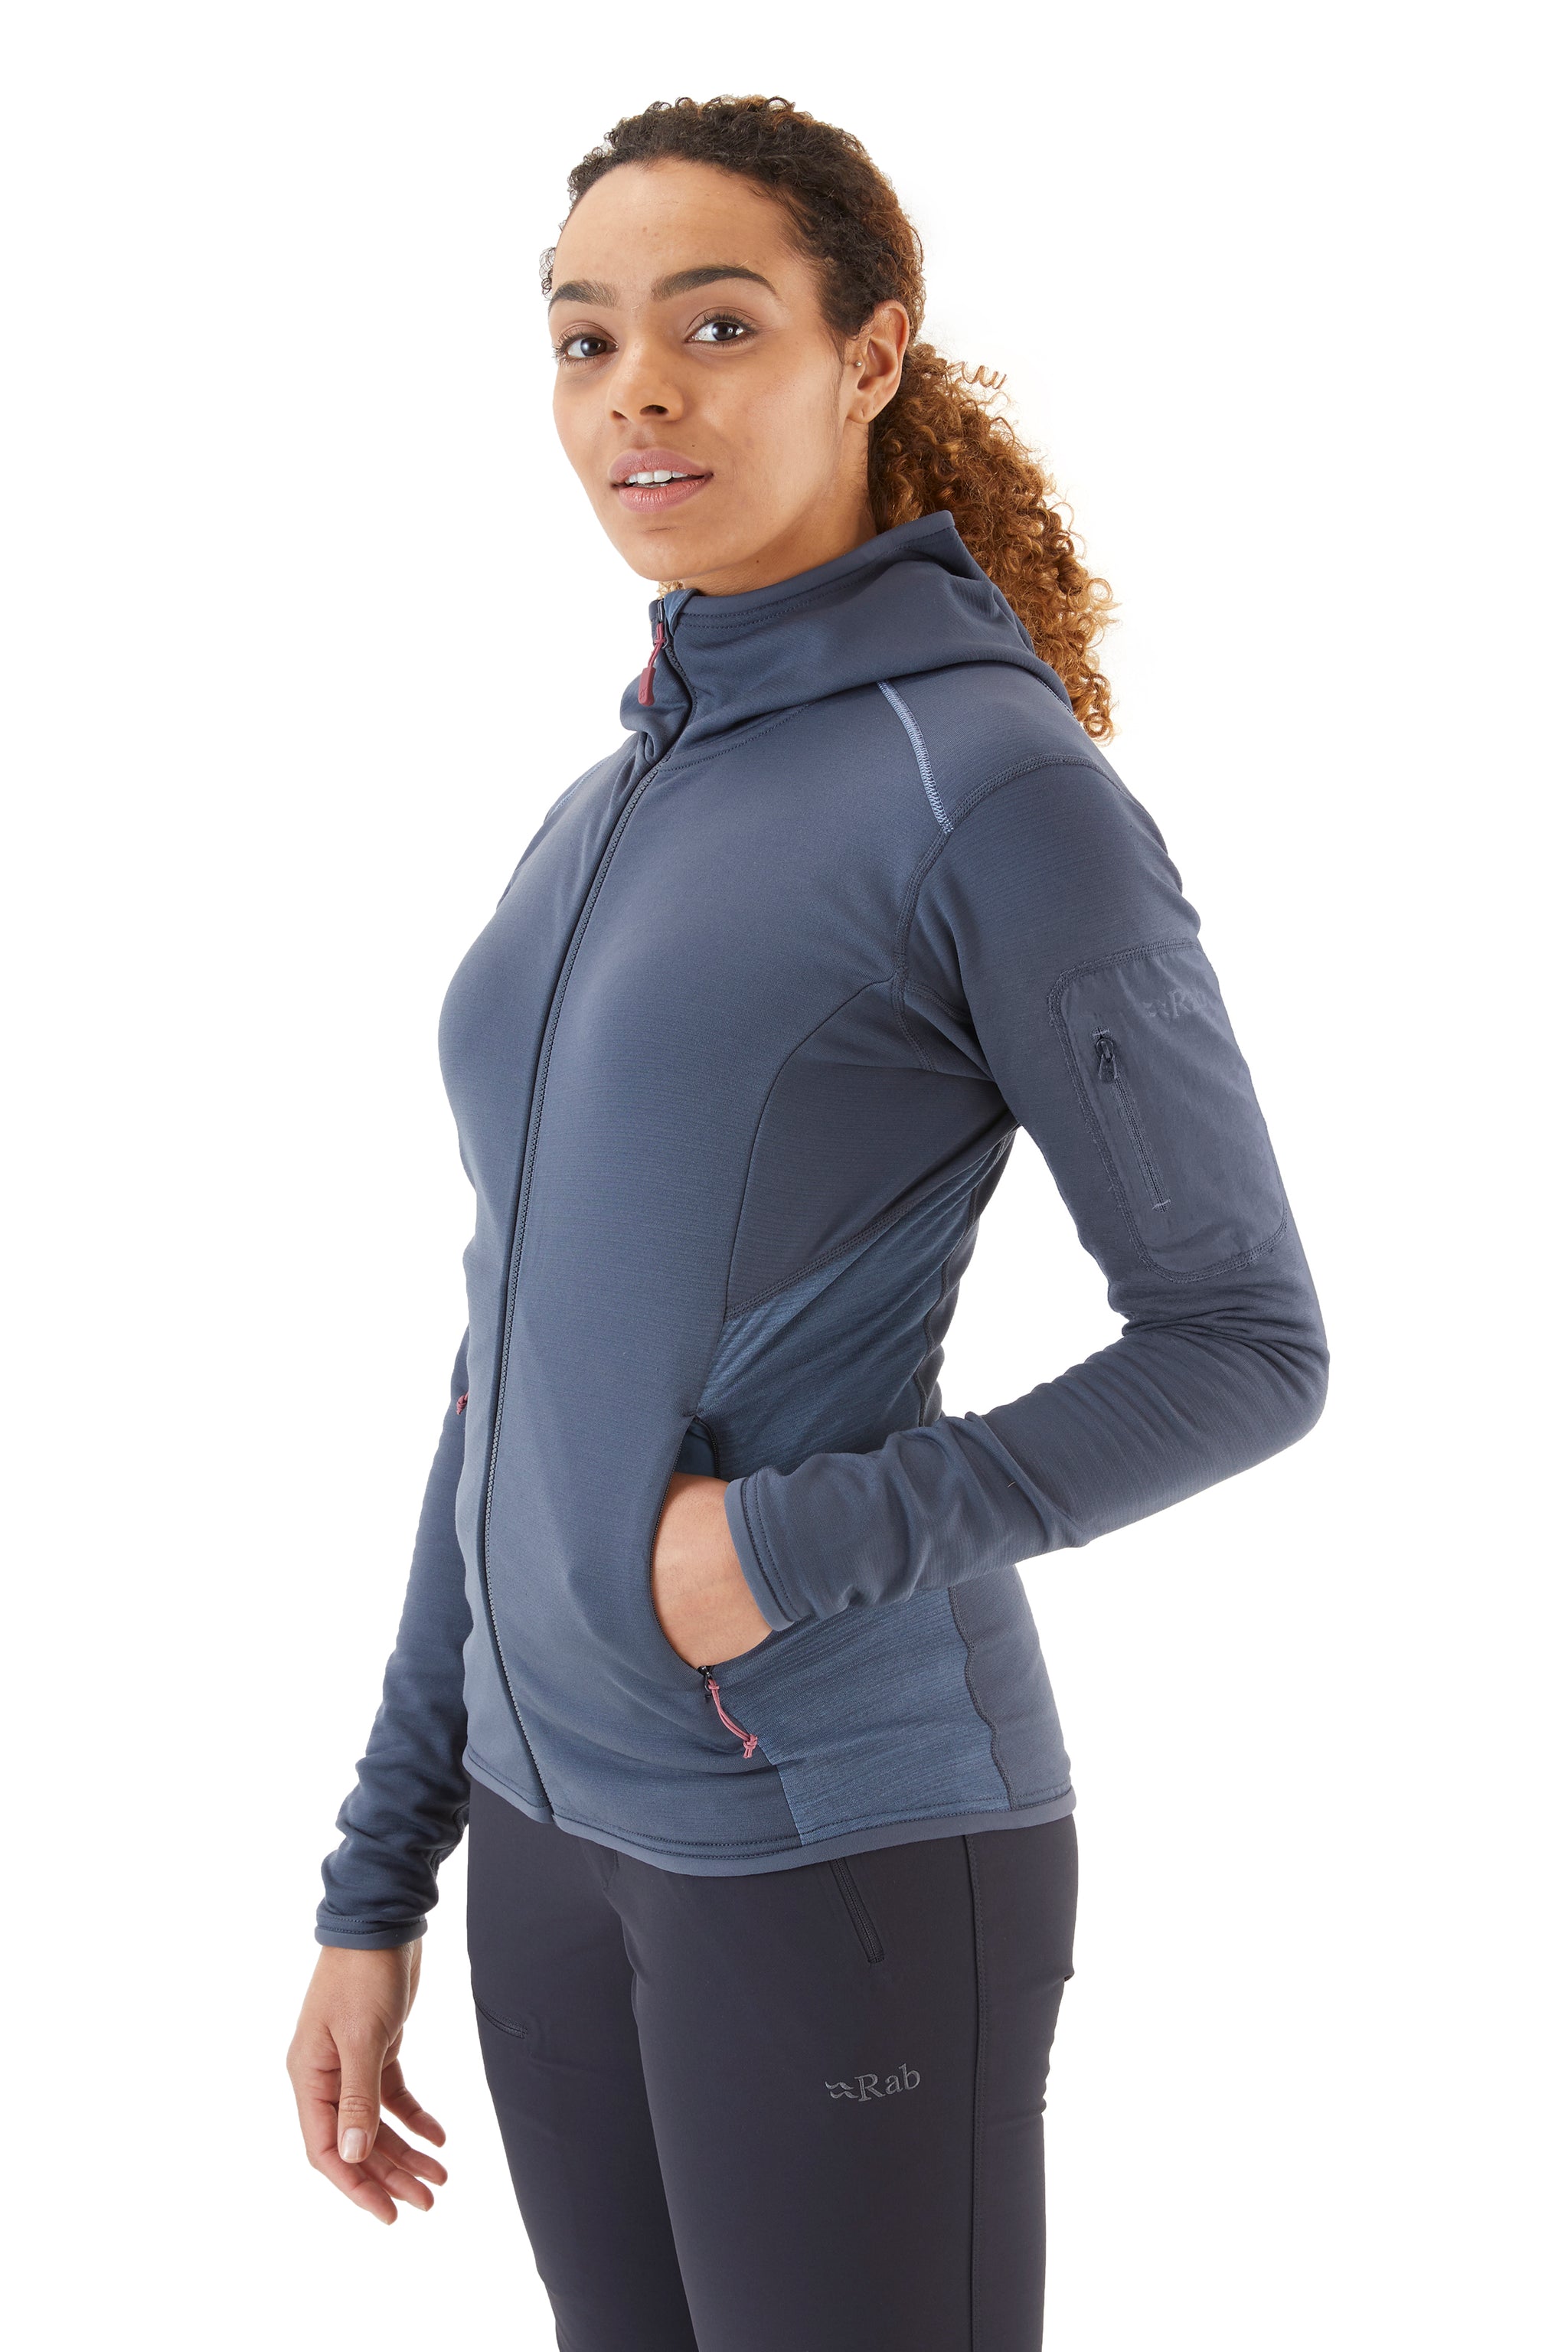 Rab Women's Syncrino Mid Fleece Hoody - Outfitters Store